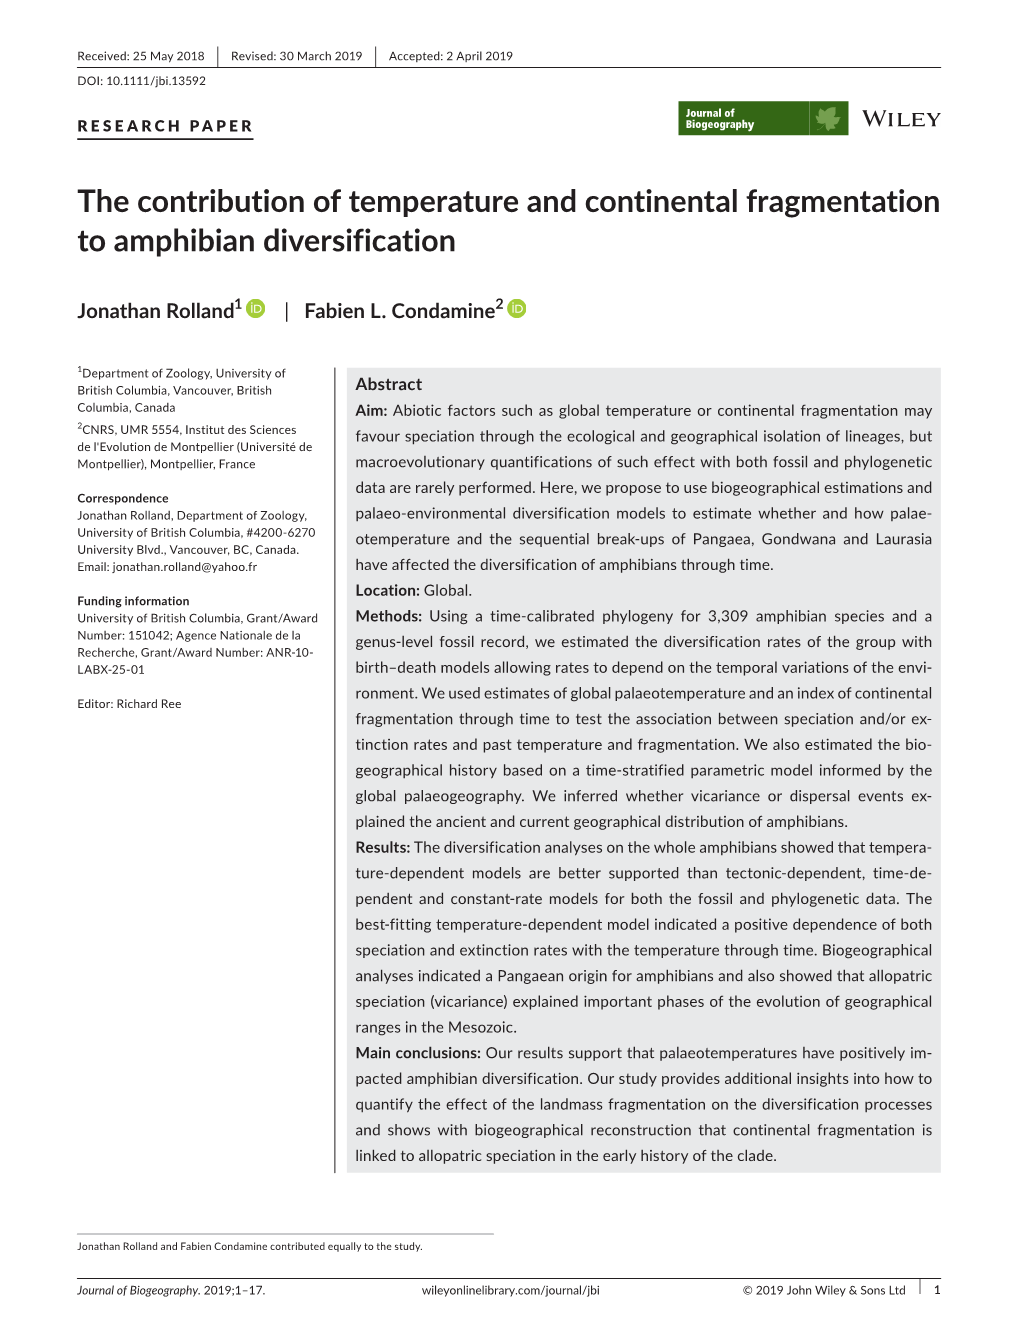 The Contribution of Temperature and Continental Fragmentation to Amphibian Diversification